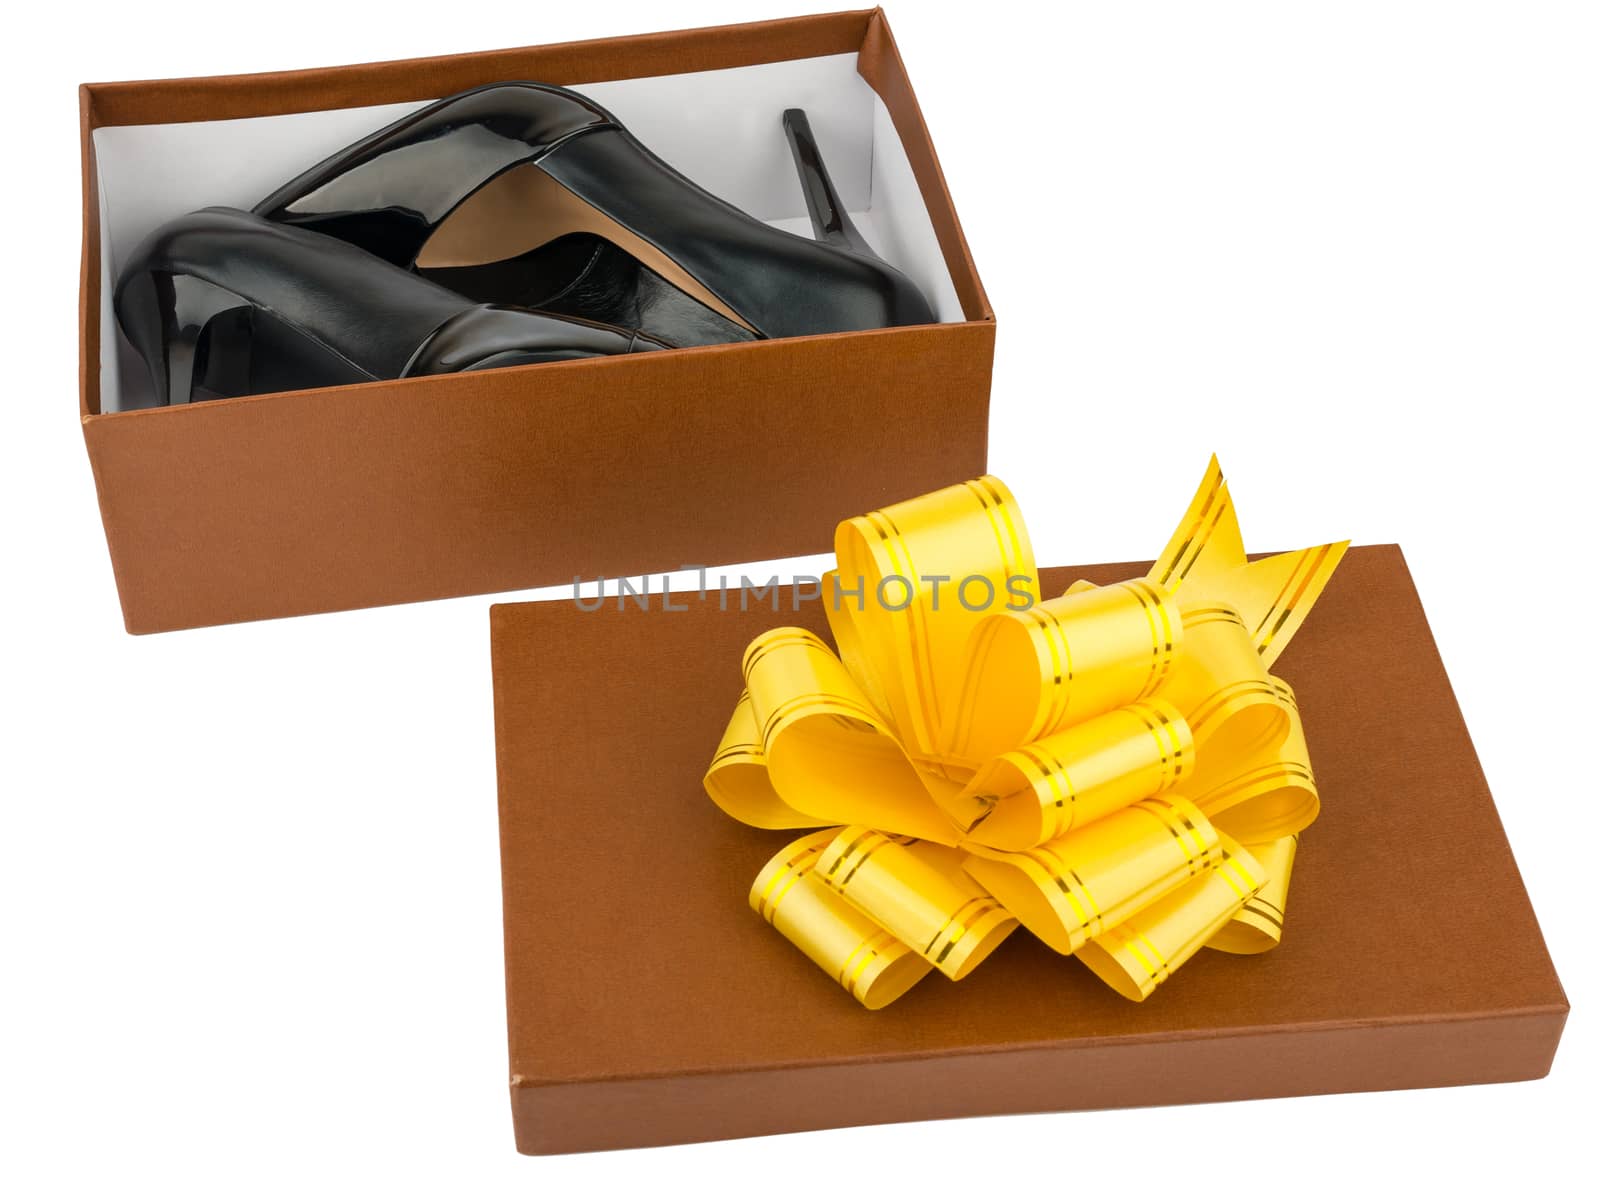 Ladies high heeled shoes in shoebox by cherezoff